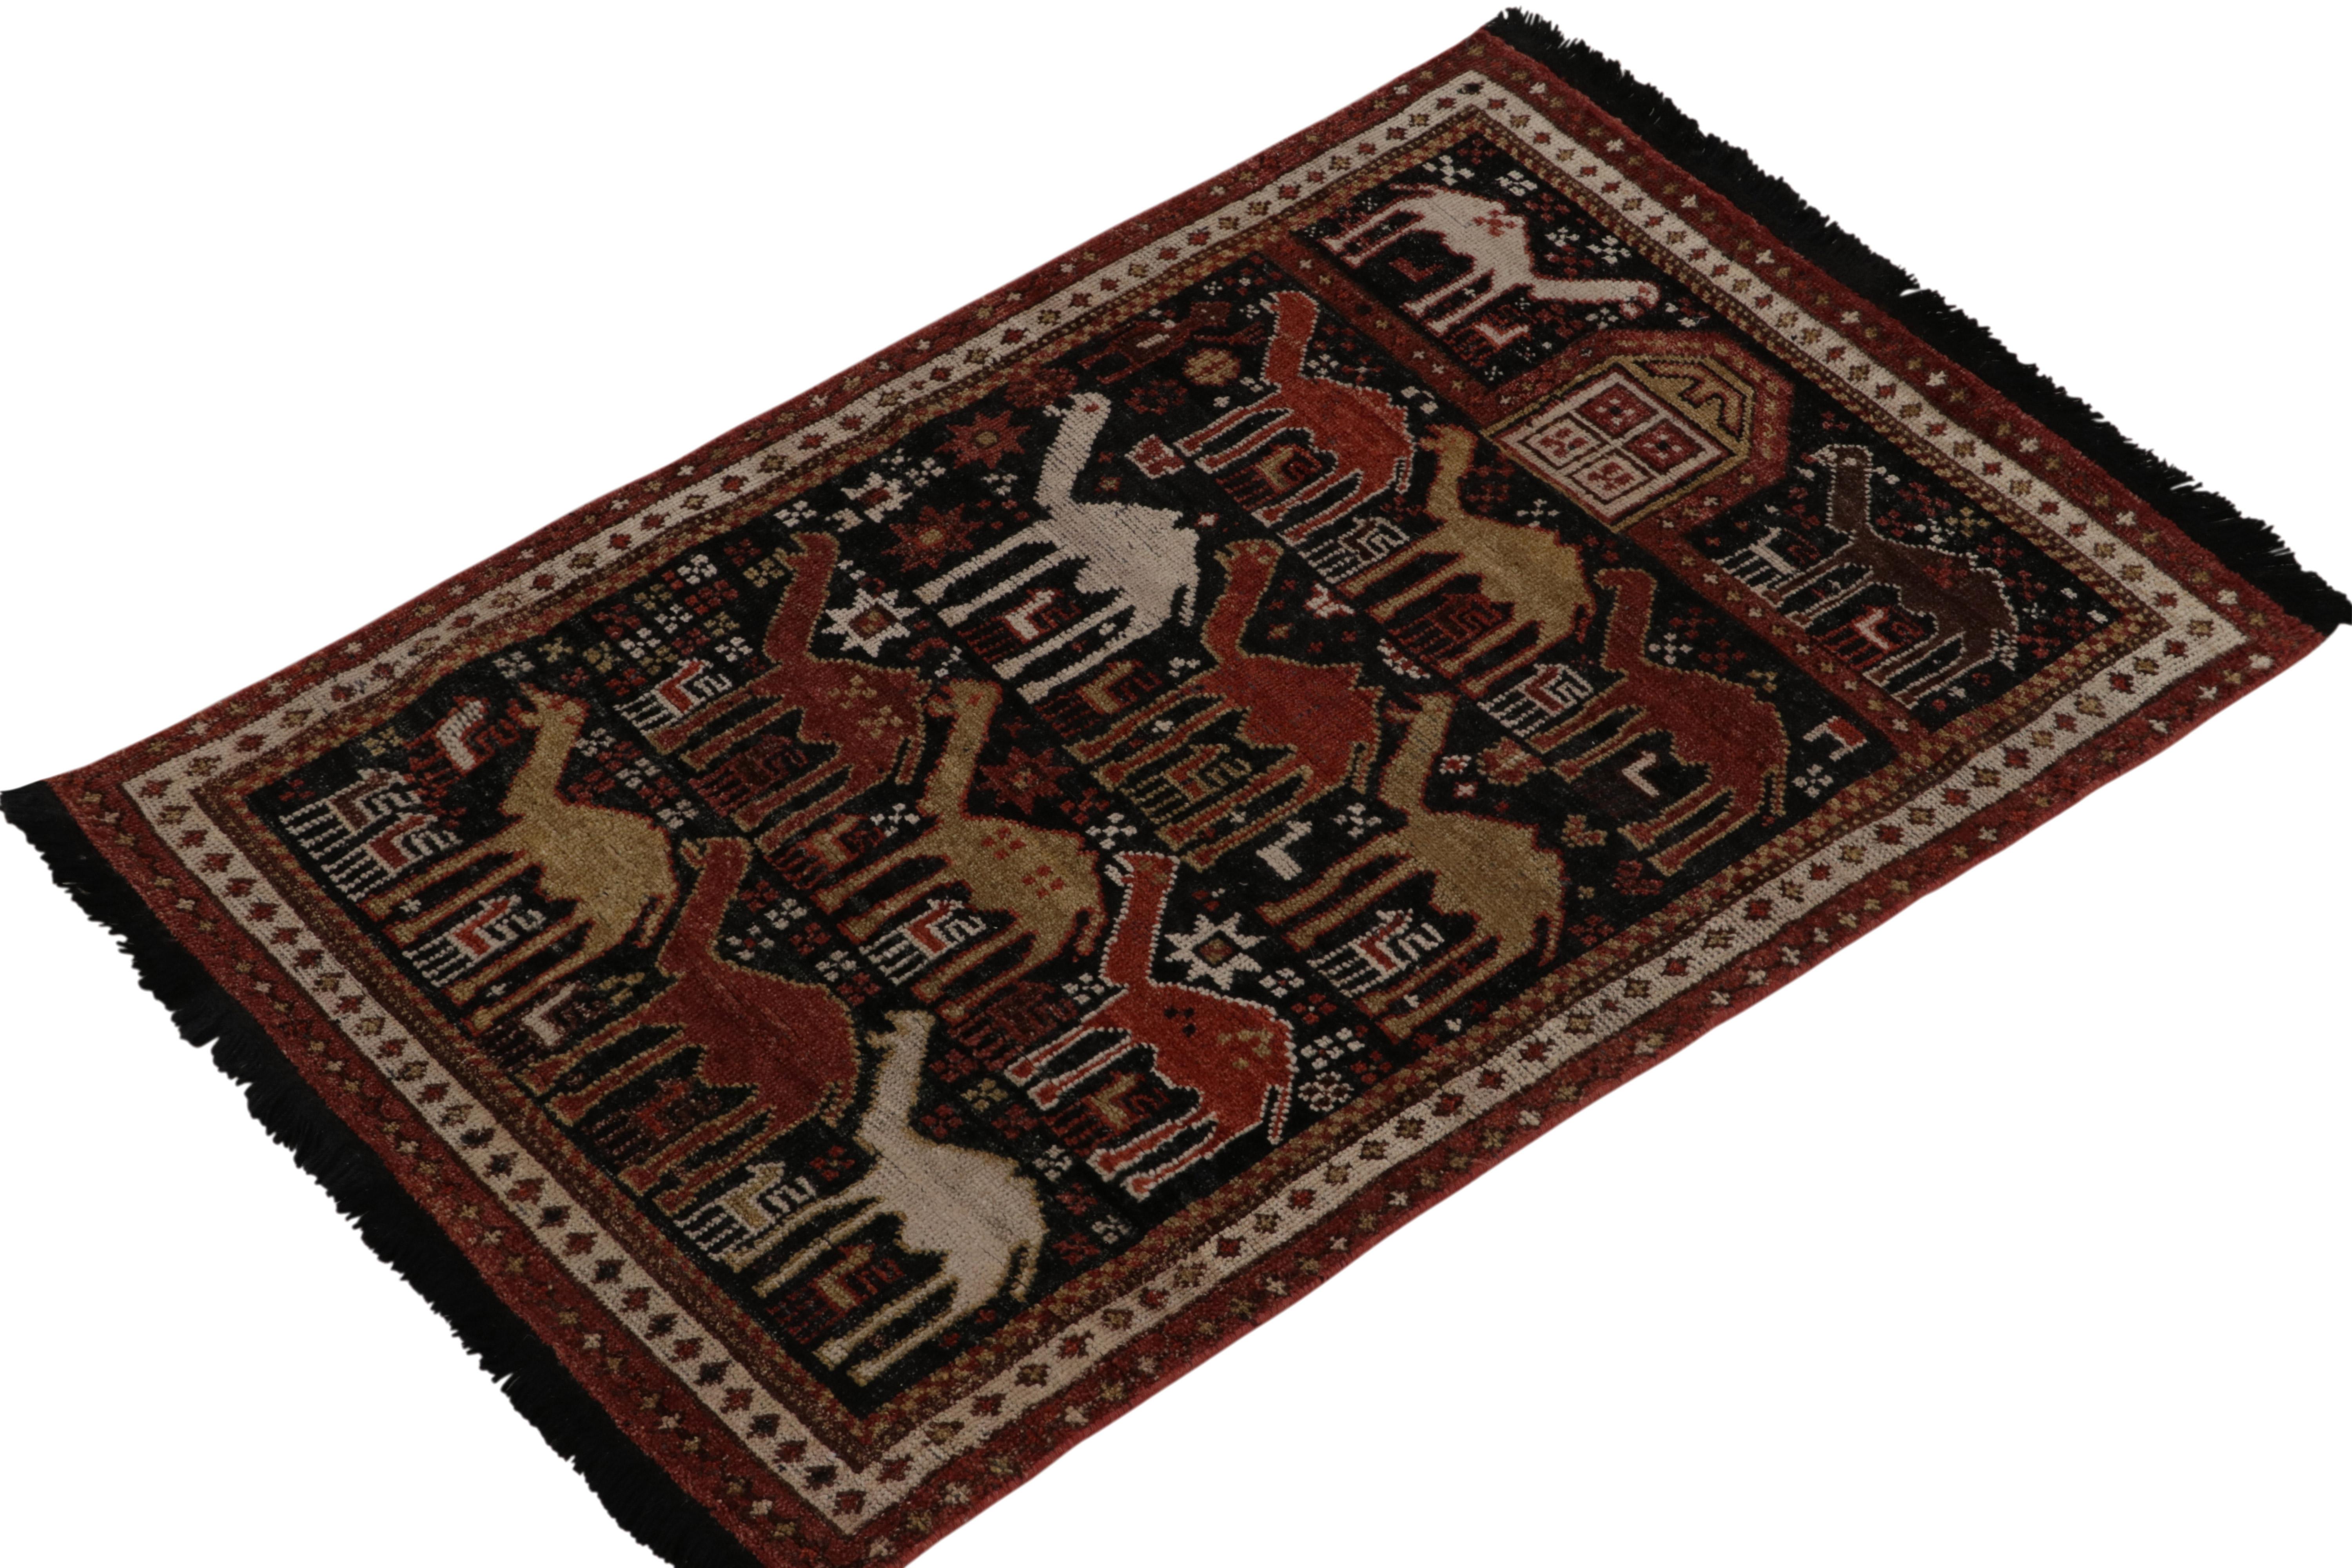 Connoting a unique contemporary approach to tribal sensibilities, this 3x4 classic style rug from the Burano Collection by Rug & Kilim showcases a montage of distinguished pictorial patterns. 

The rustic drawing captures the eye with a union of